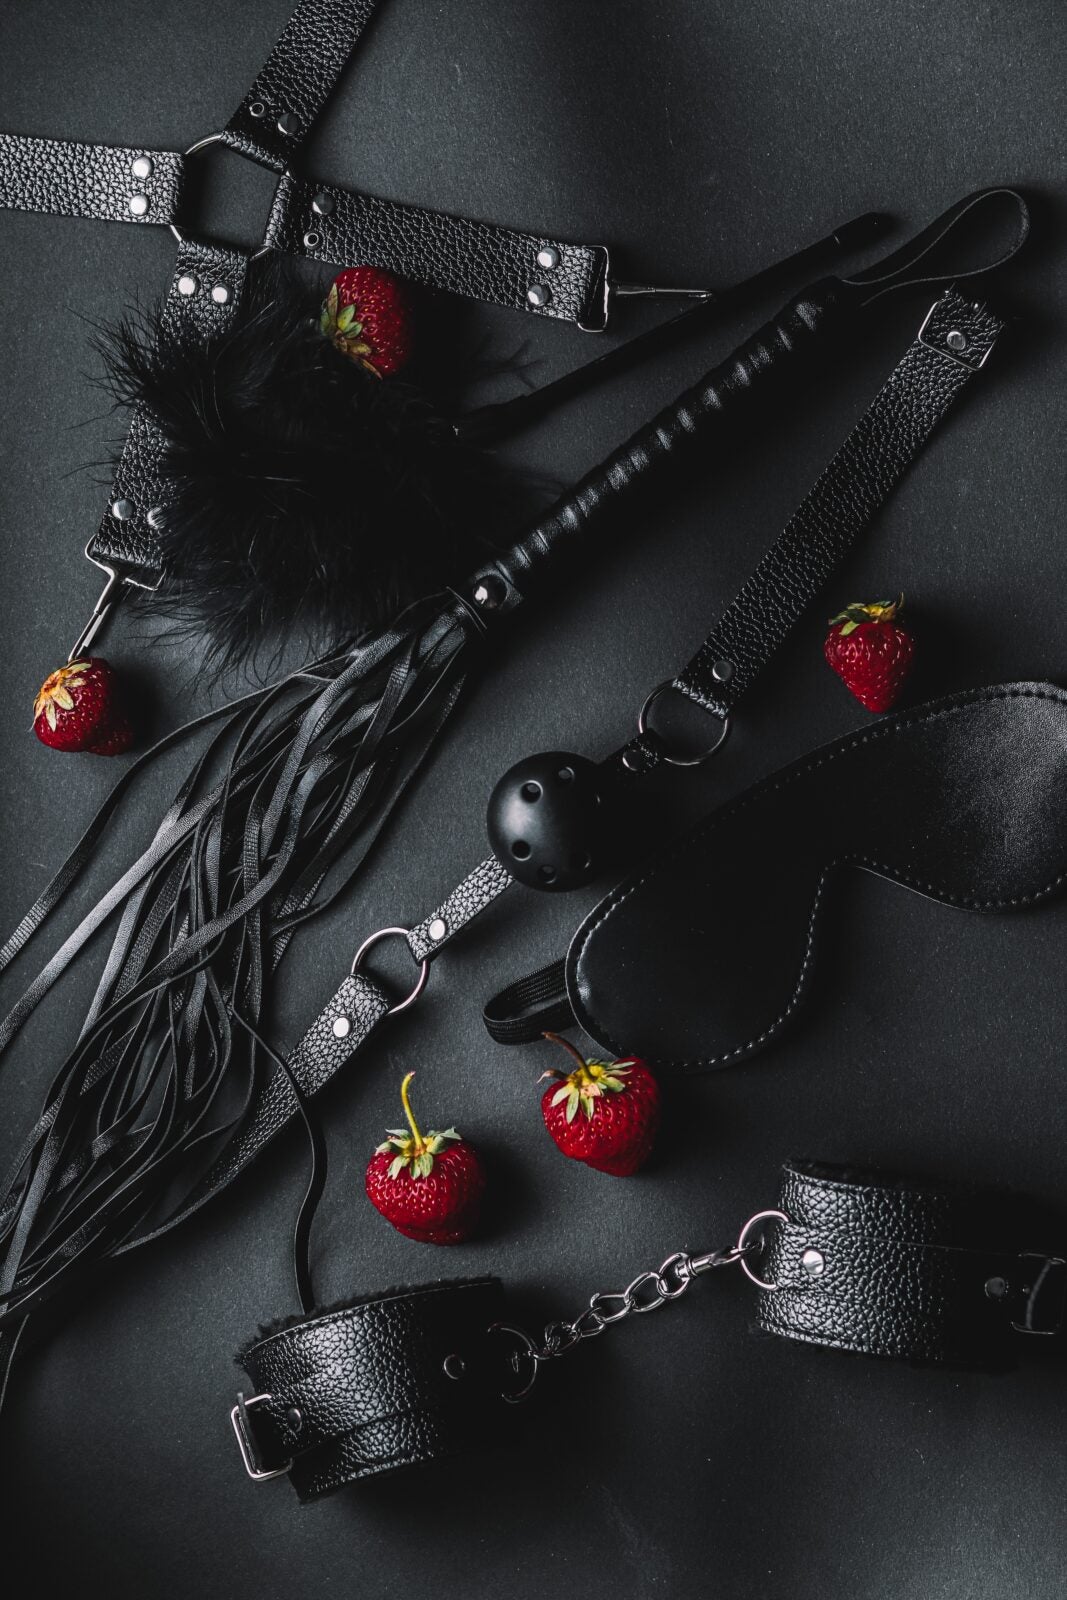 An Assortment Of Bdsm Equipments Including A Whip, Handcuffs, A Mouth Gag And A Blindfold.